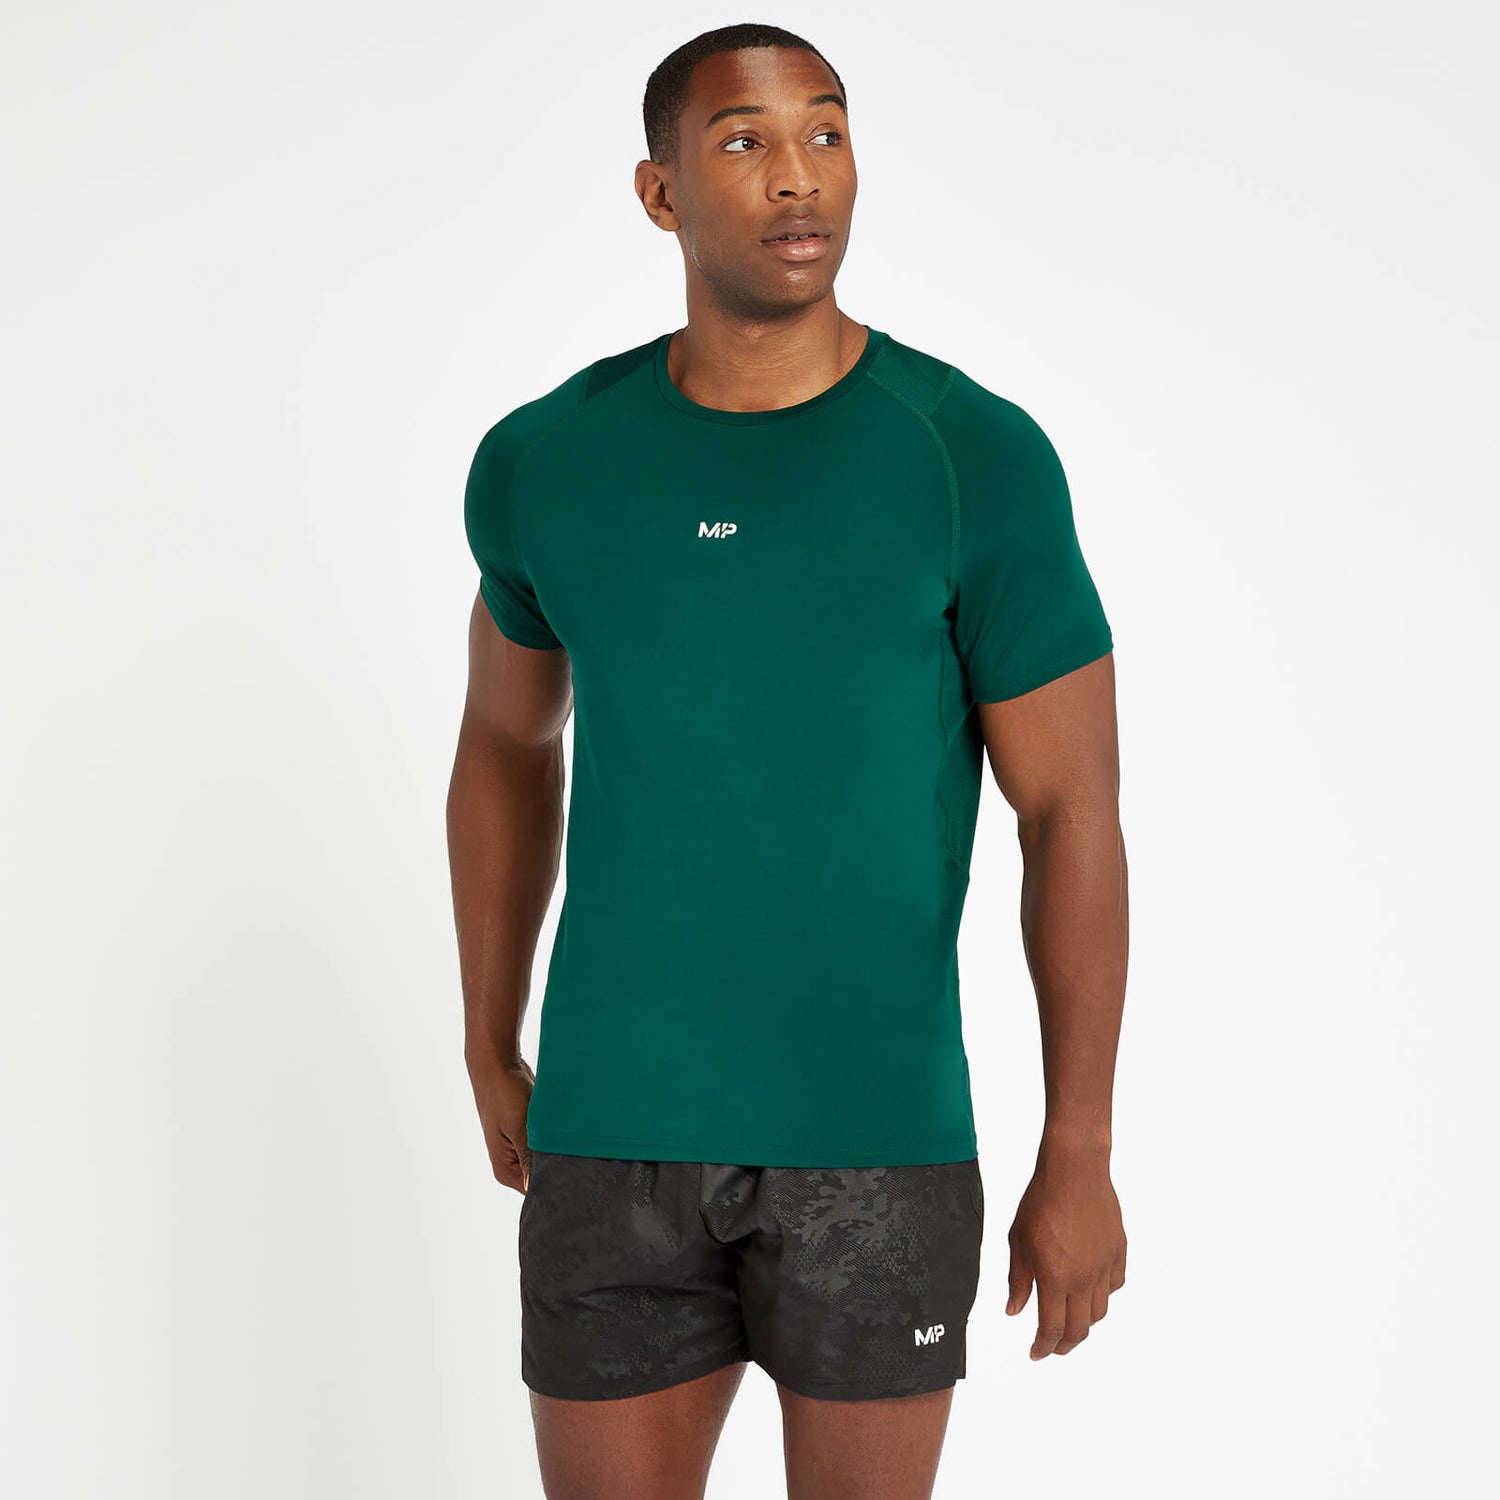 Limited Edition MP Men's Engage Short Sleeve T-Shirt - Pine